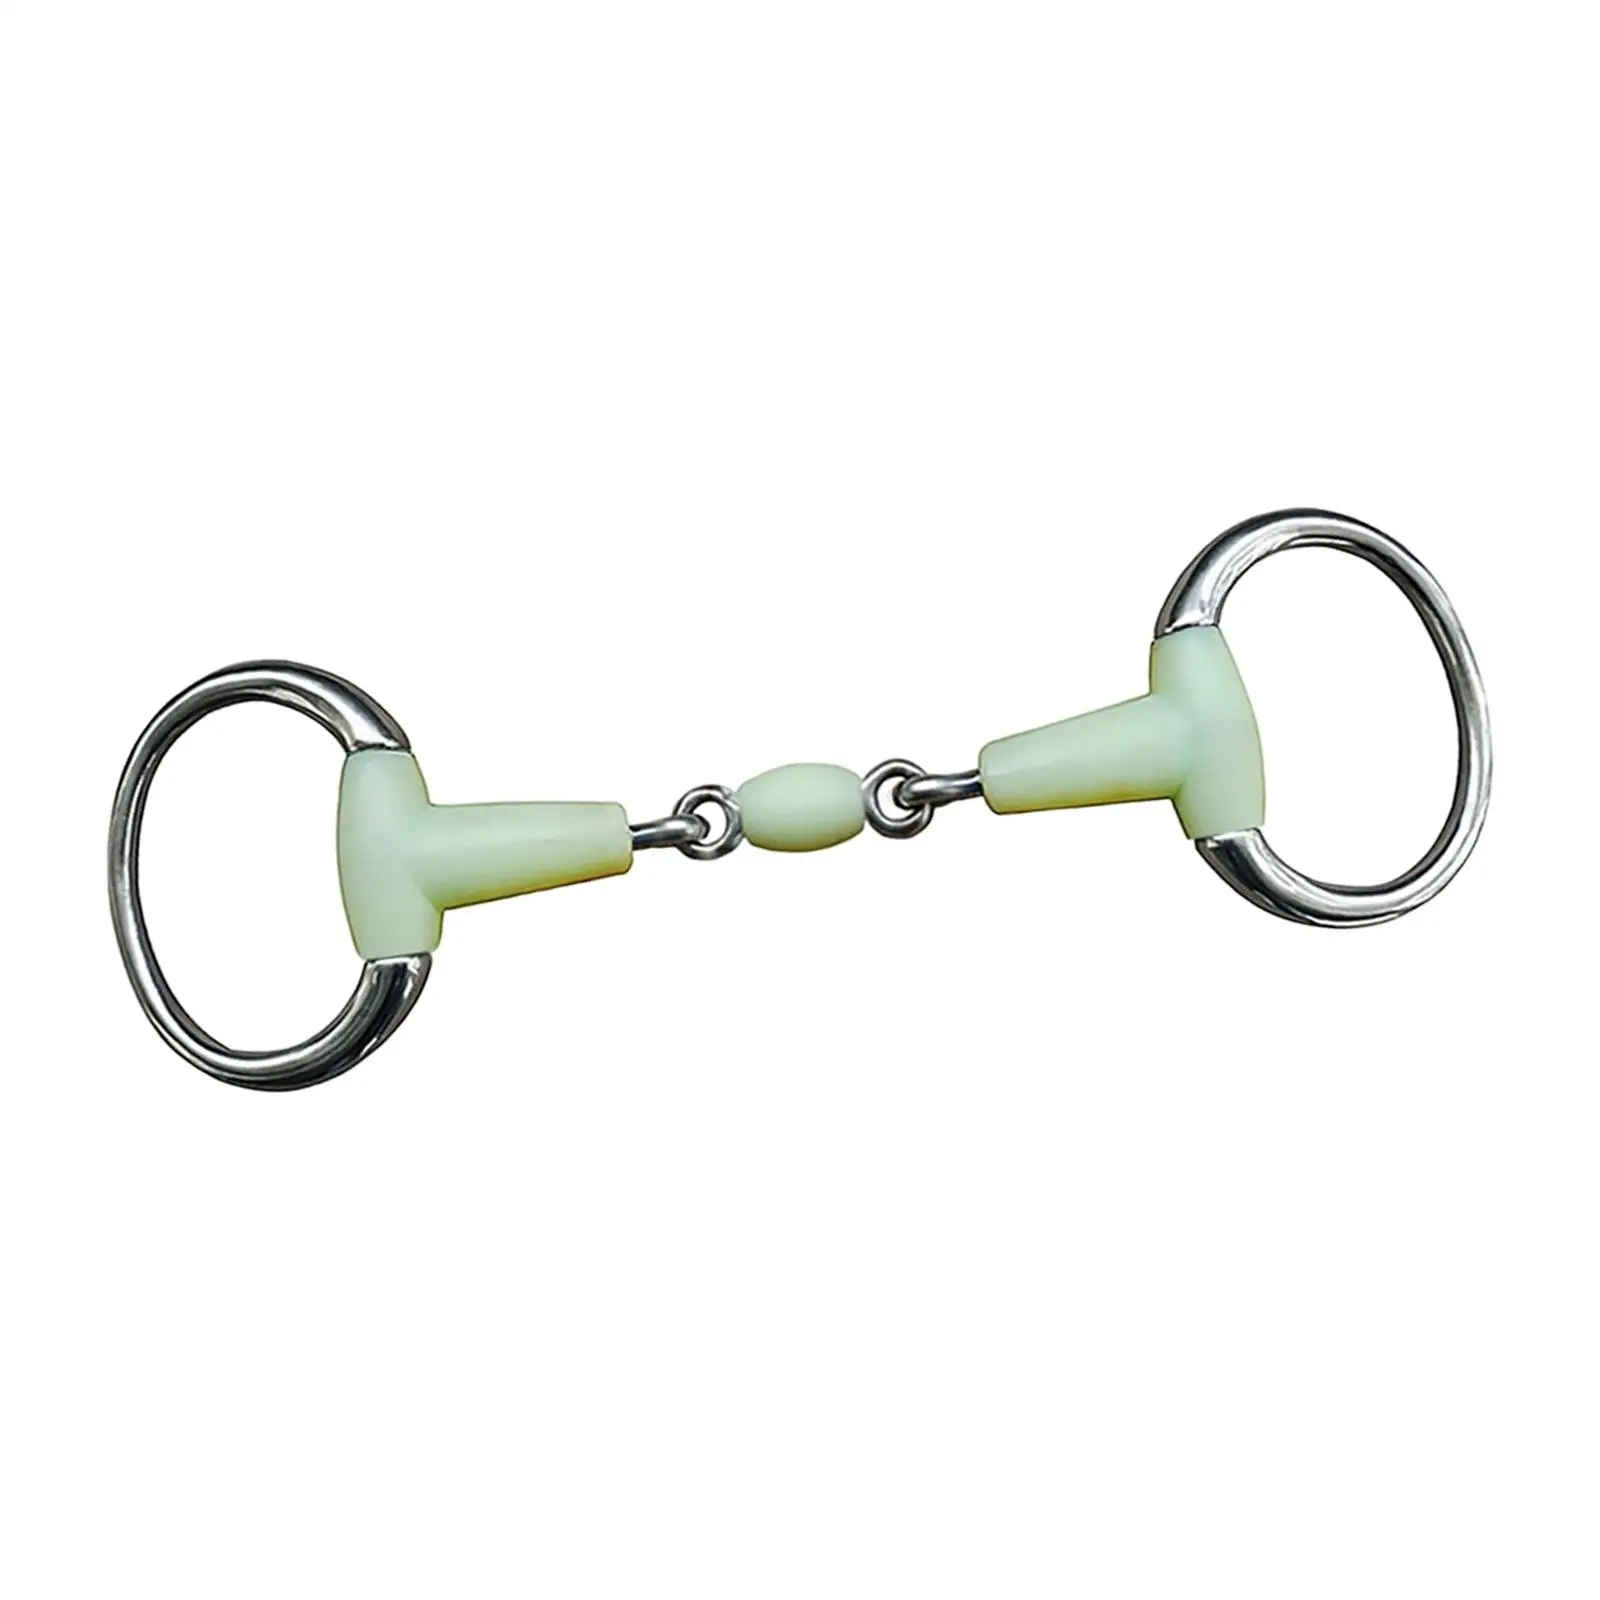 Horse Ring Bit Horse Training Snaffle Tool for Draft Horses Mules Outdoor Sports